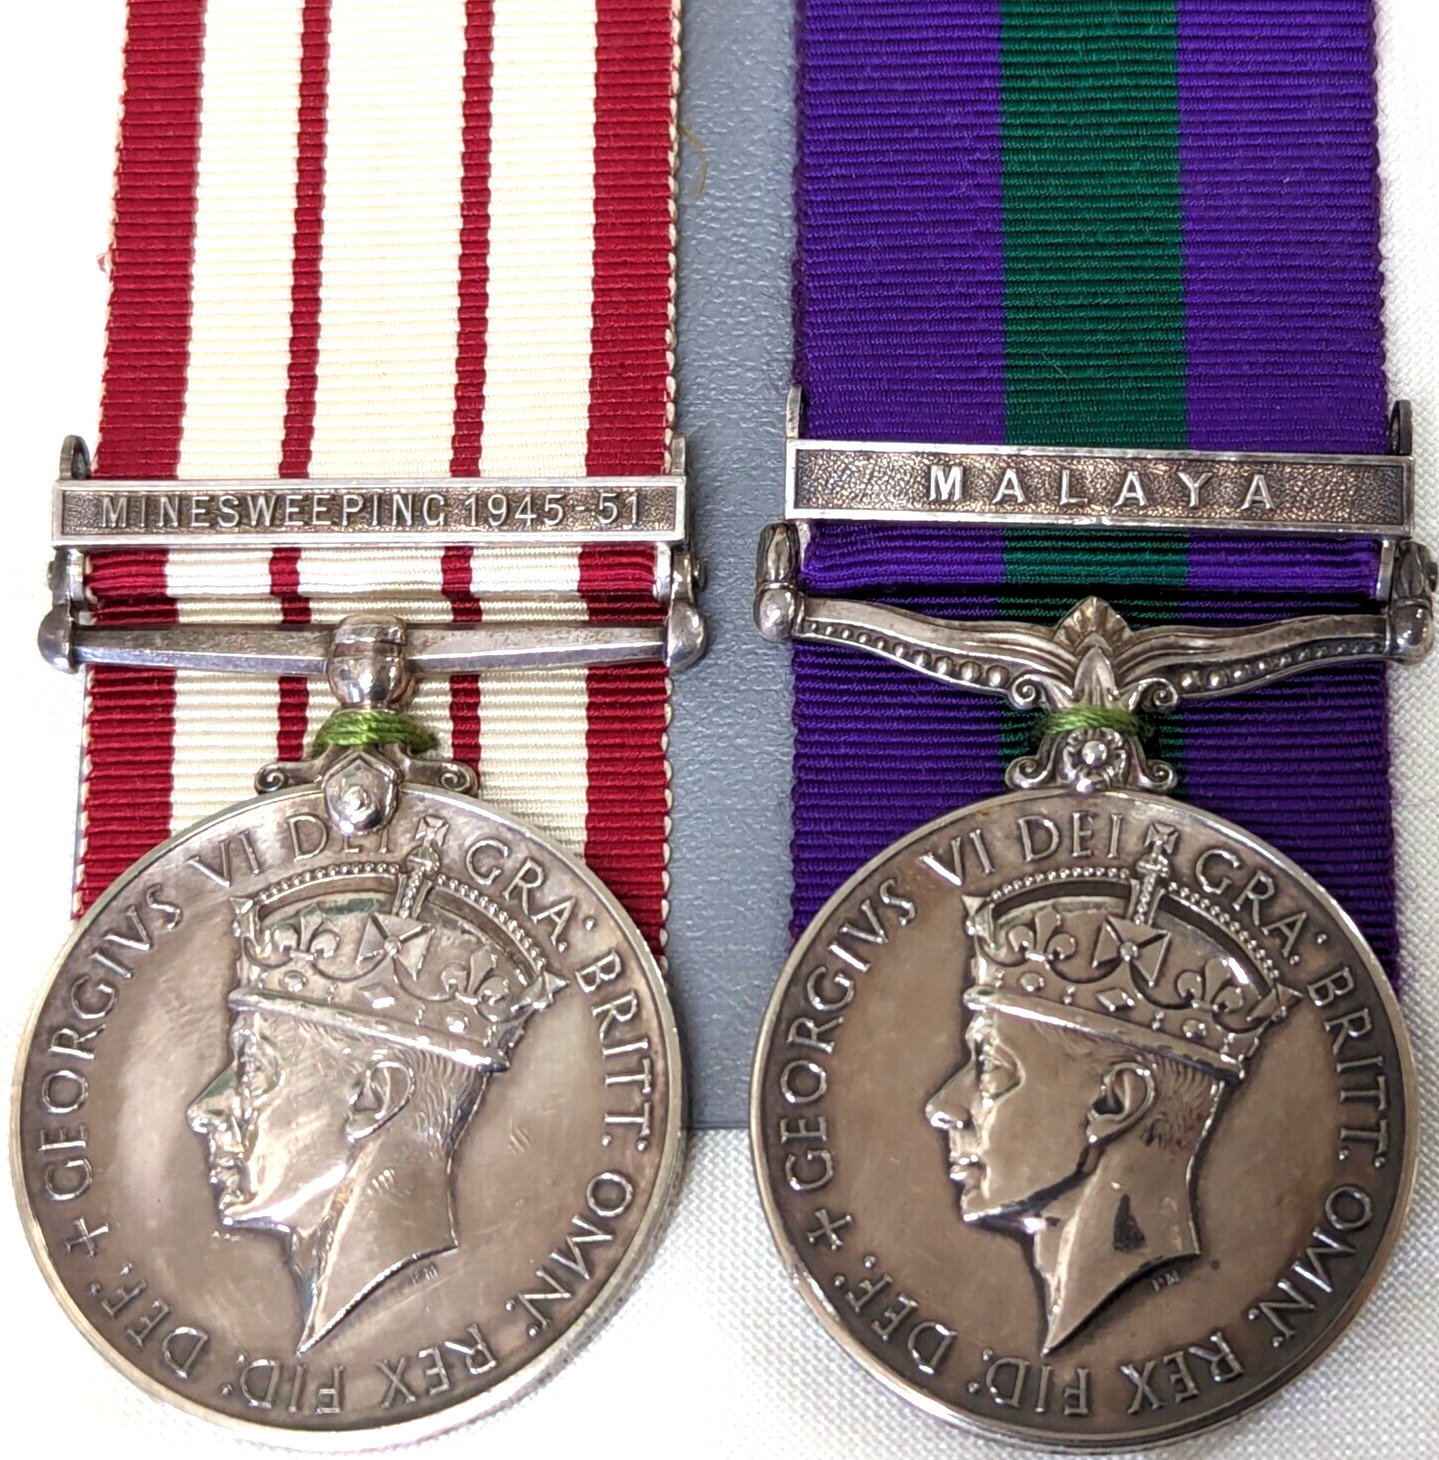 WW2 Royal Navy & Air Force medals Minesweeping 1945 – 51 S Wagstaff